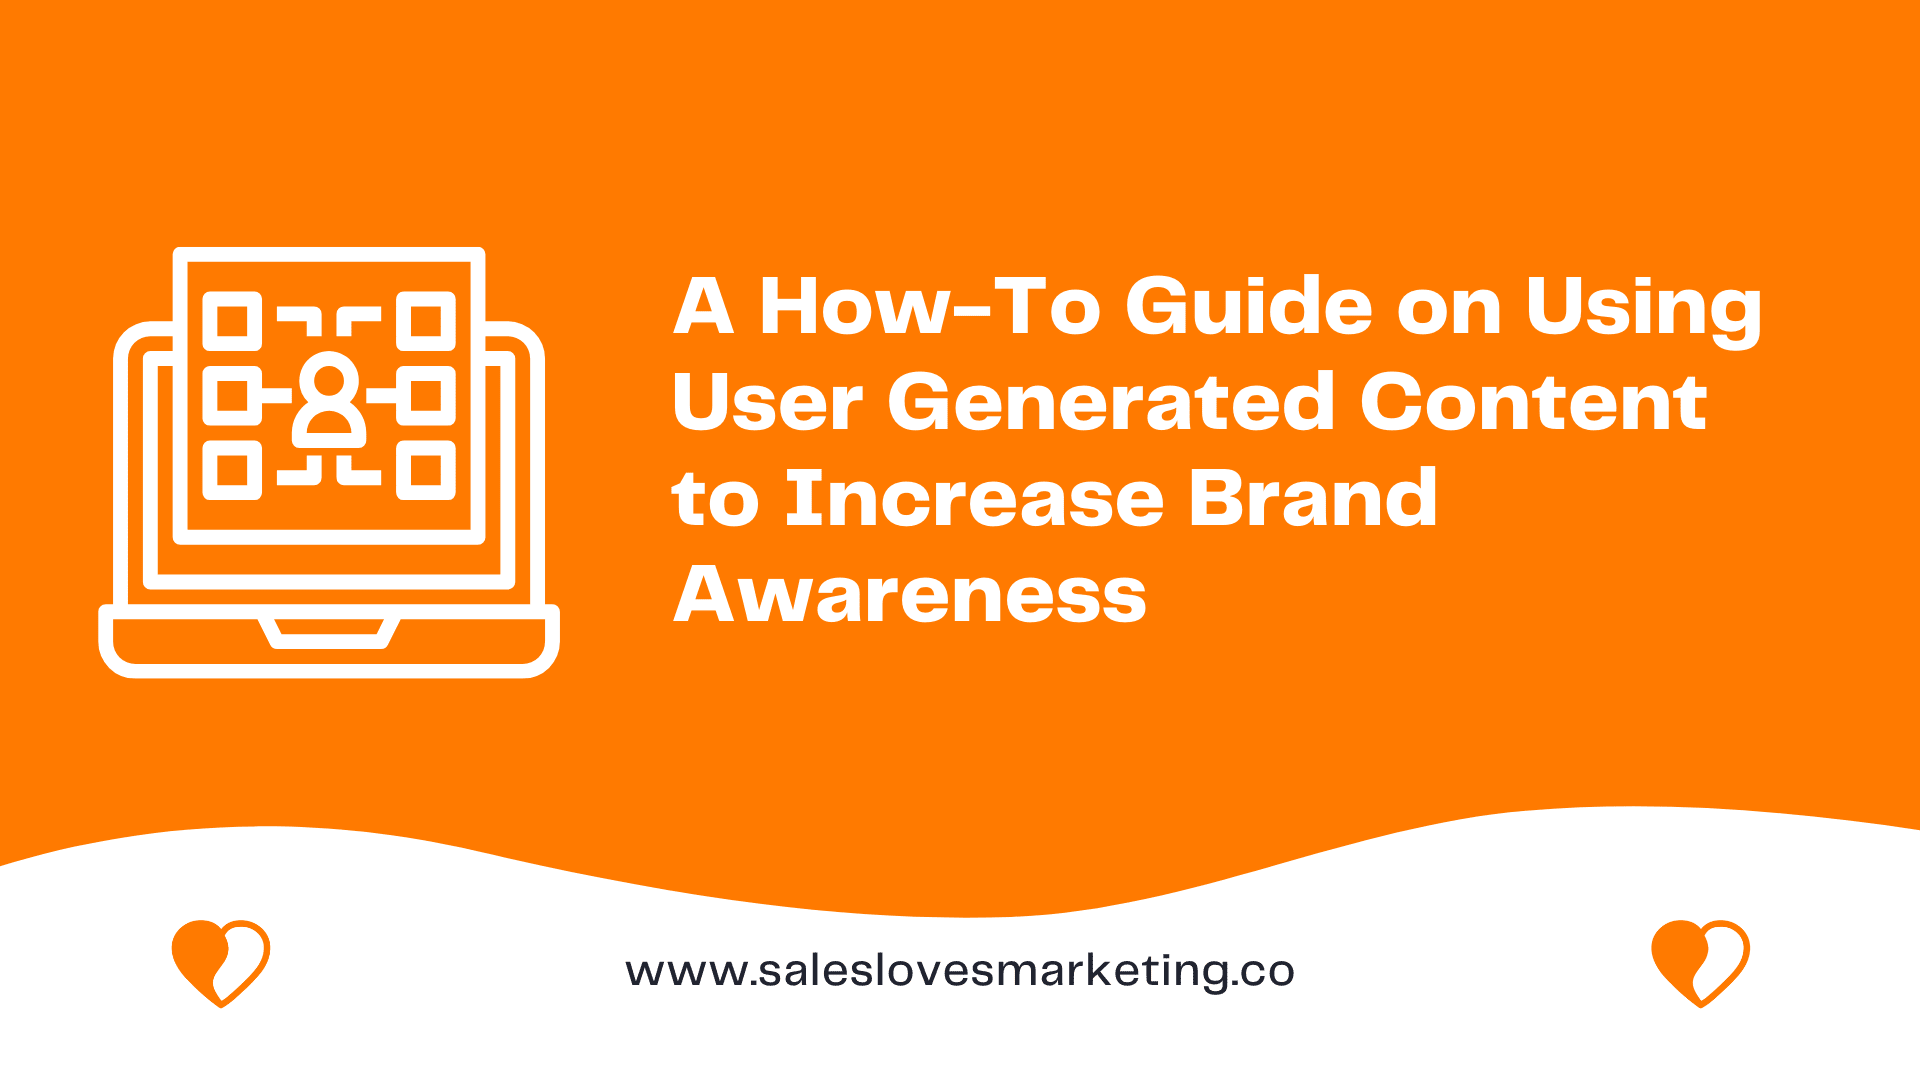 A How-To Guide on Using User Generated Content to Increase Brand Awareness￼